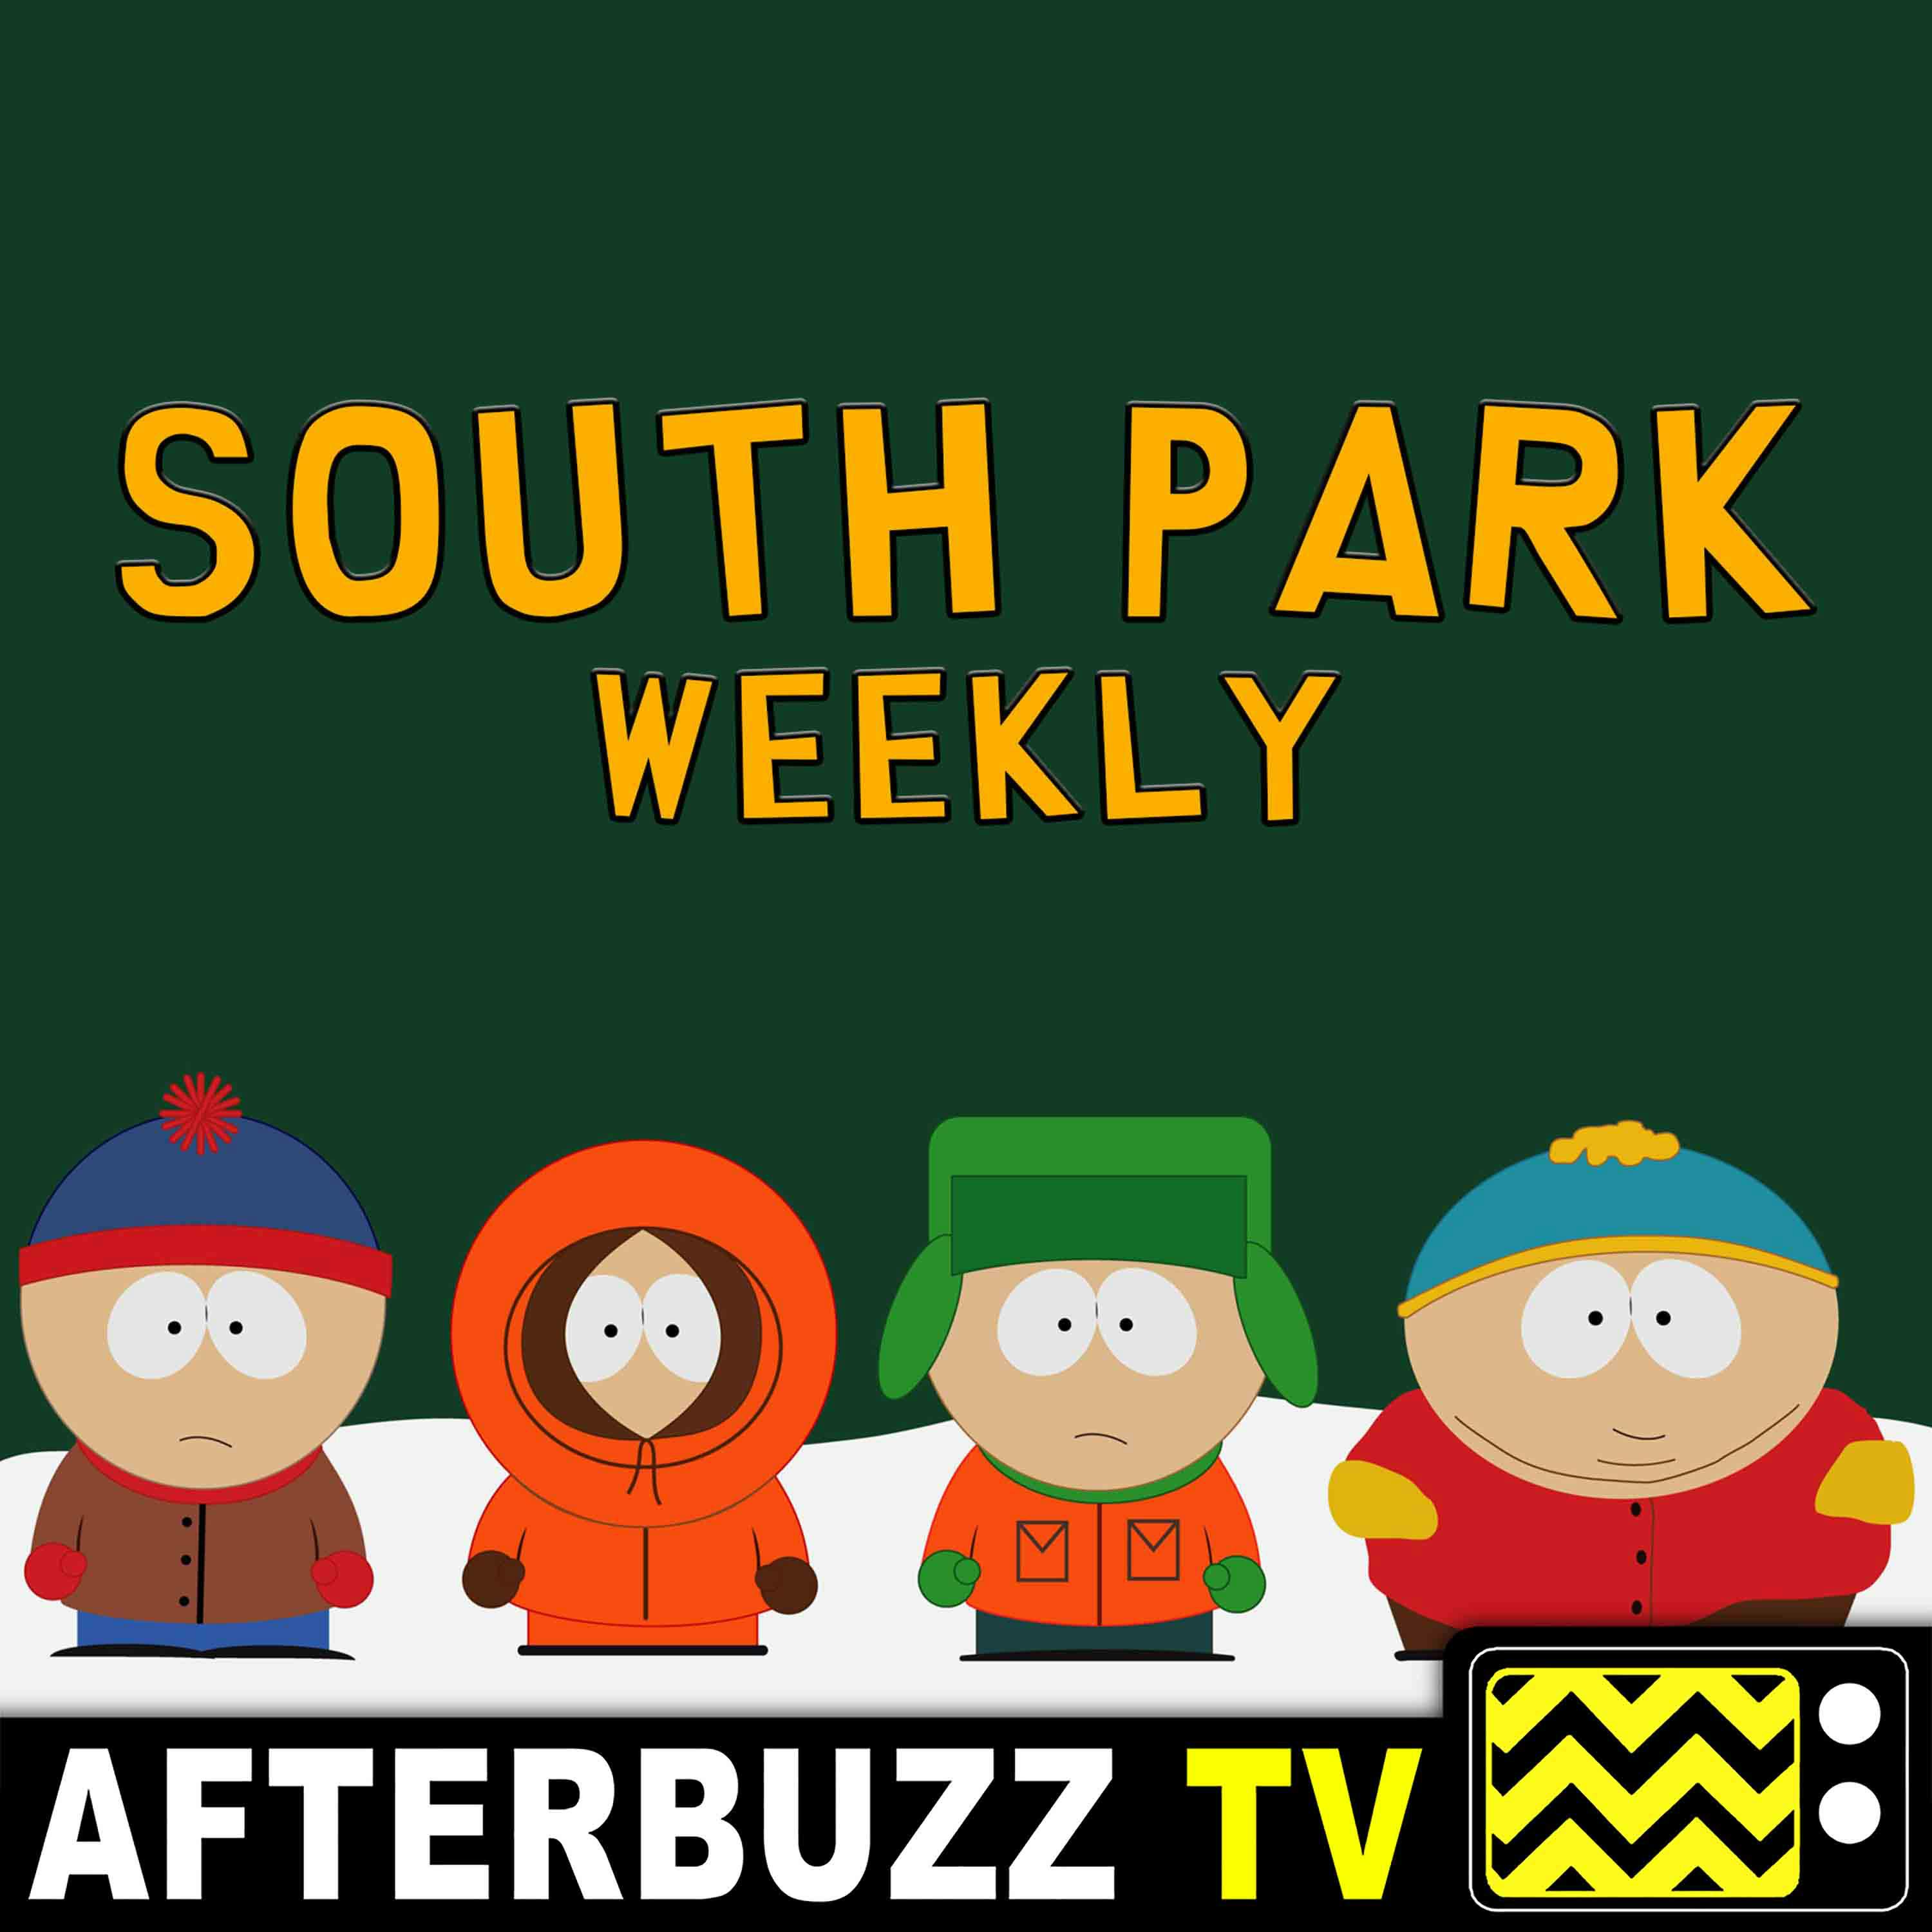 South Park S:22 Time to Get Cereal E:6